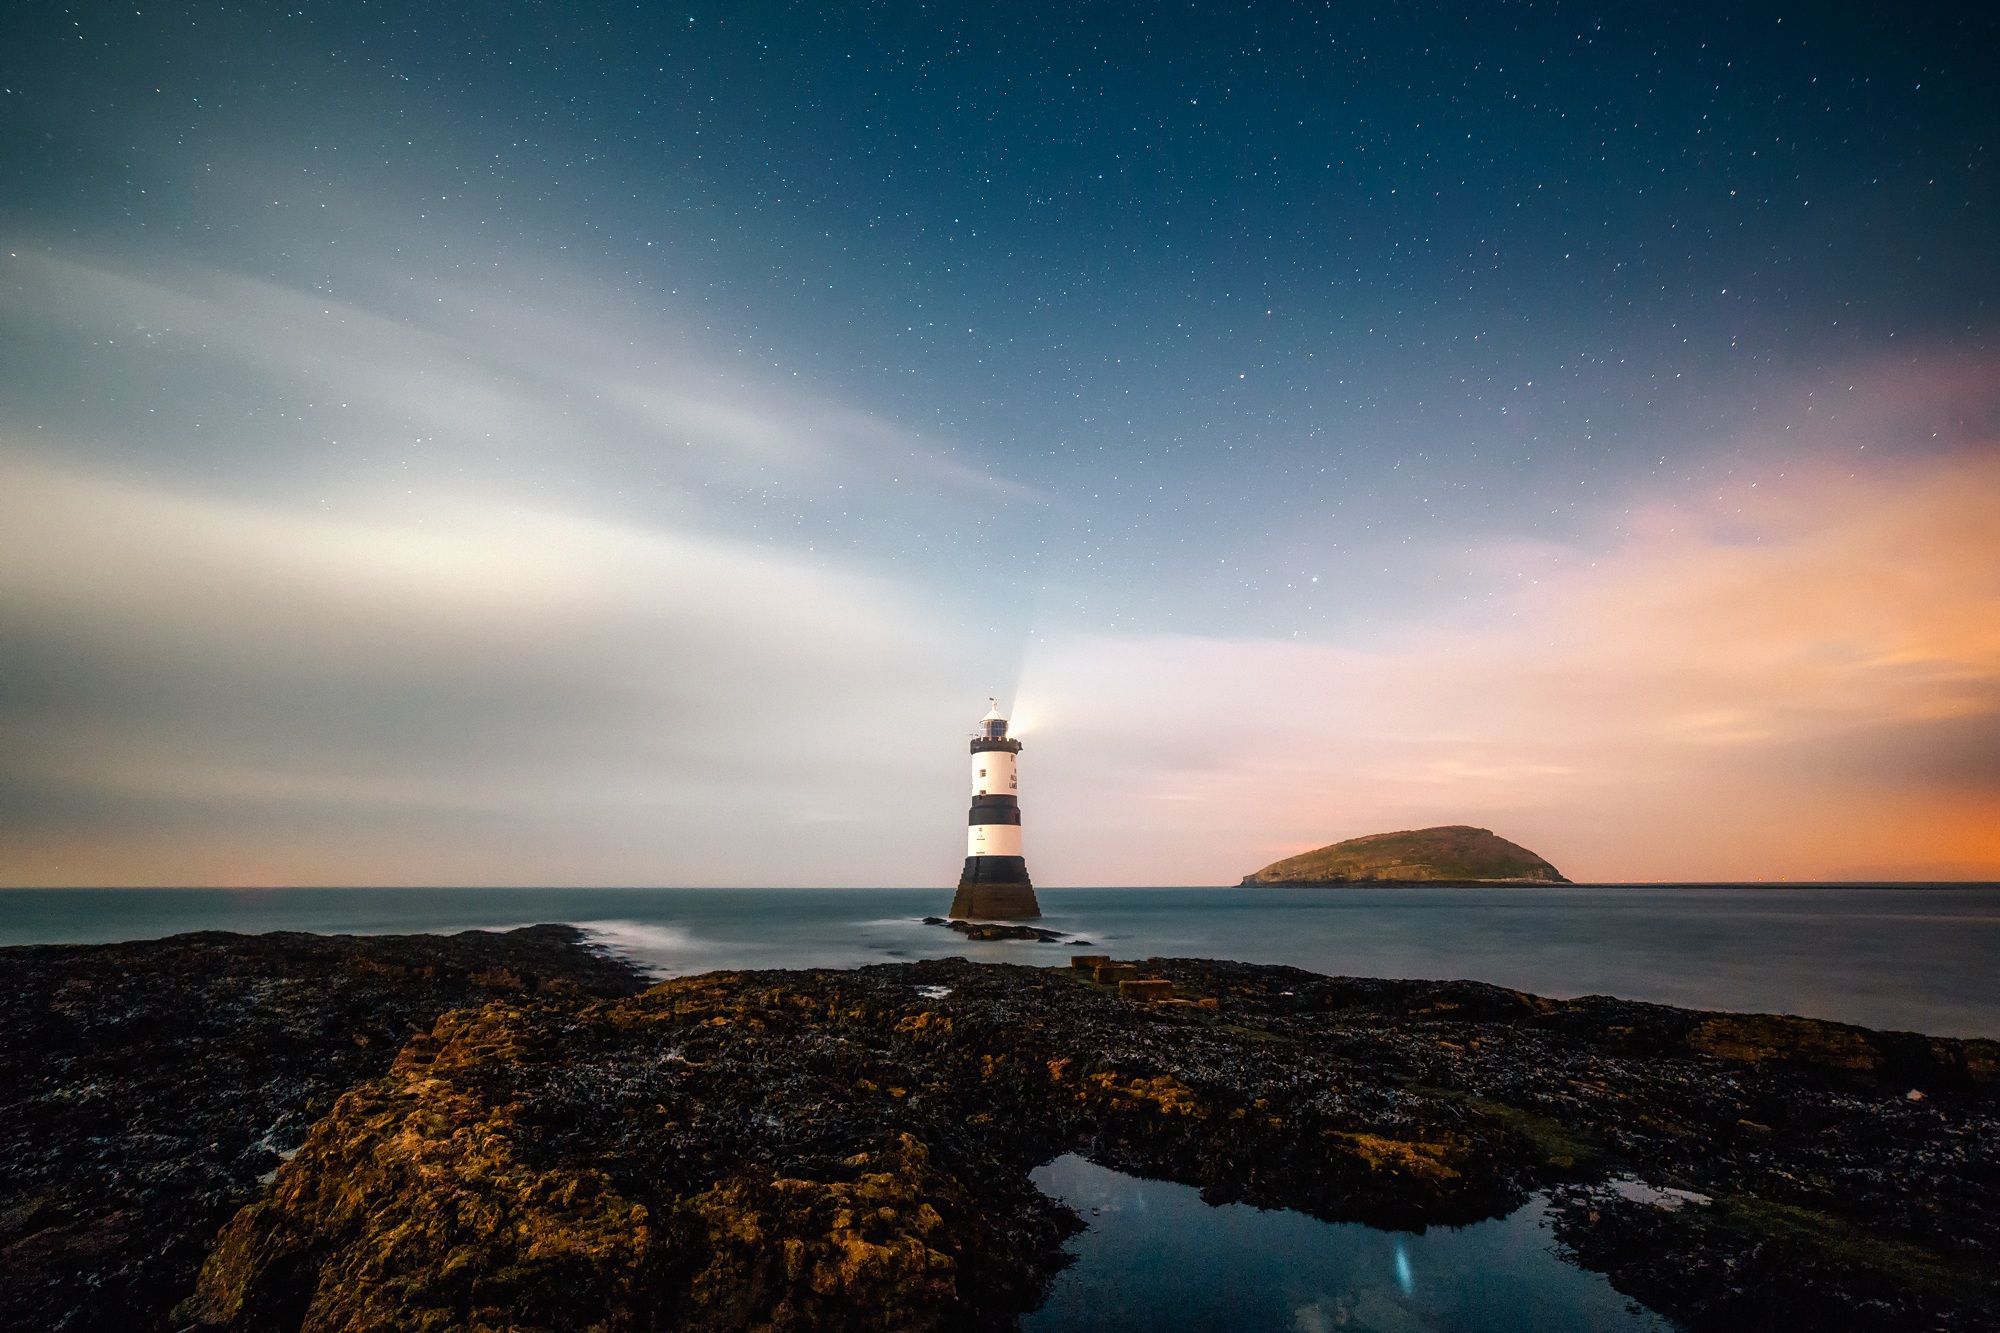 image of lighthouse and a rock on seashore